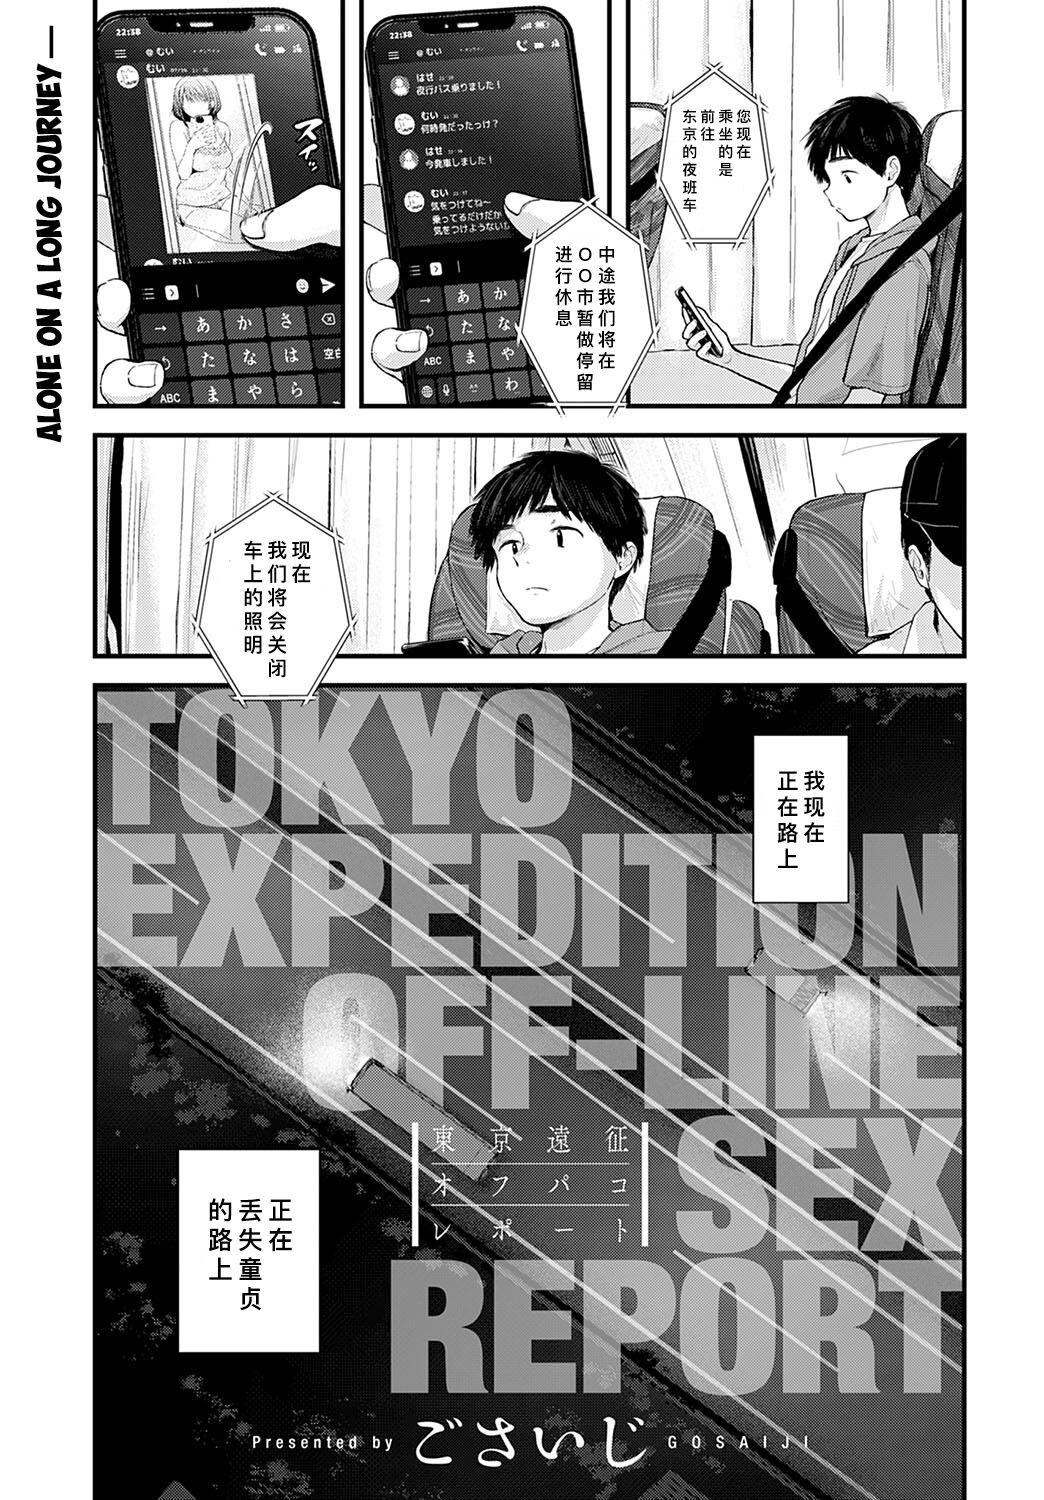 Pick Up Tokyo Expedition Off-line Sex Report Seduction - Page 1